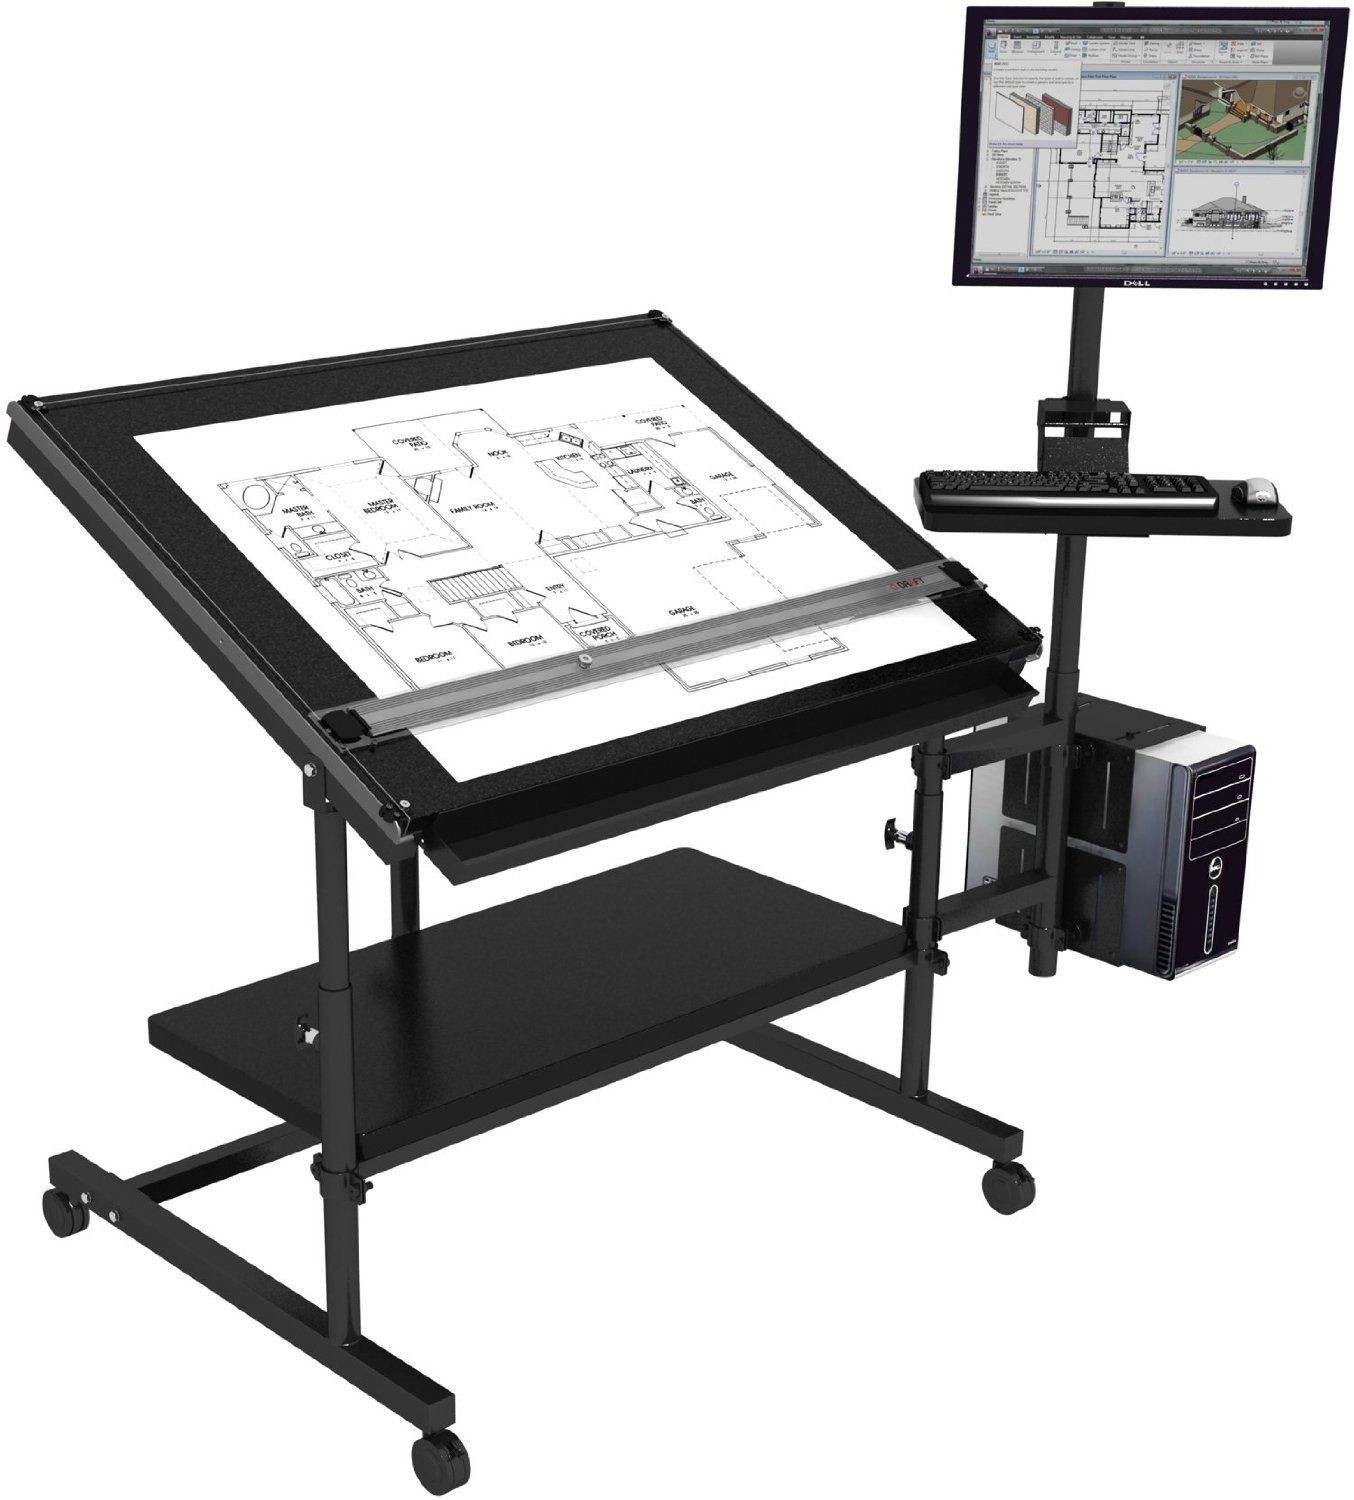 Professional Drafting Table 48"x36" - Black Frame, Black Surface